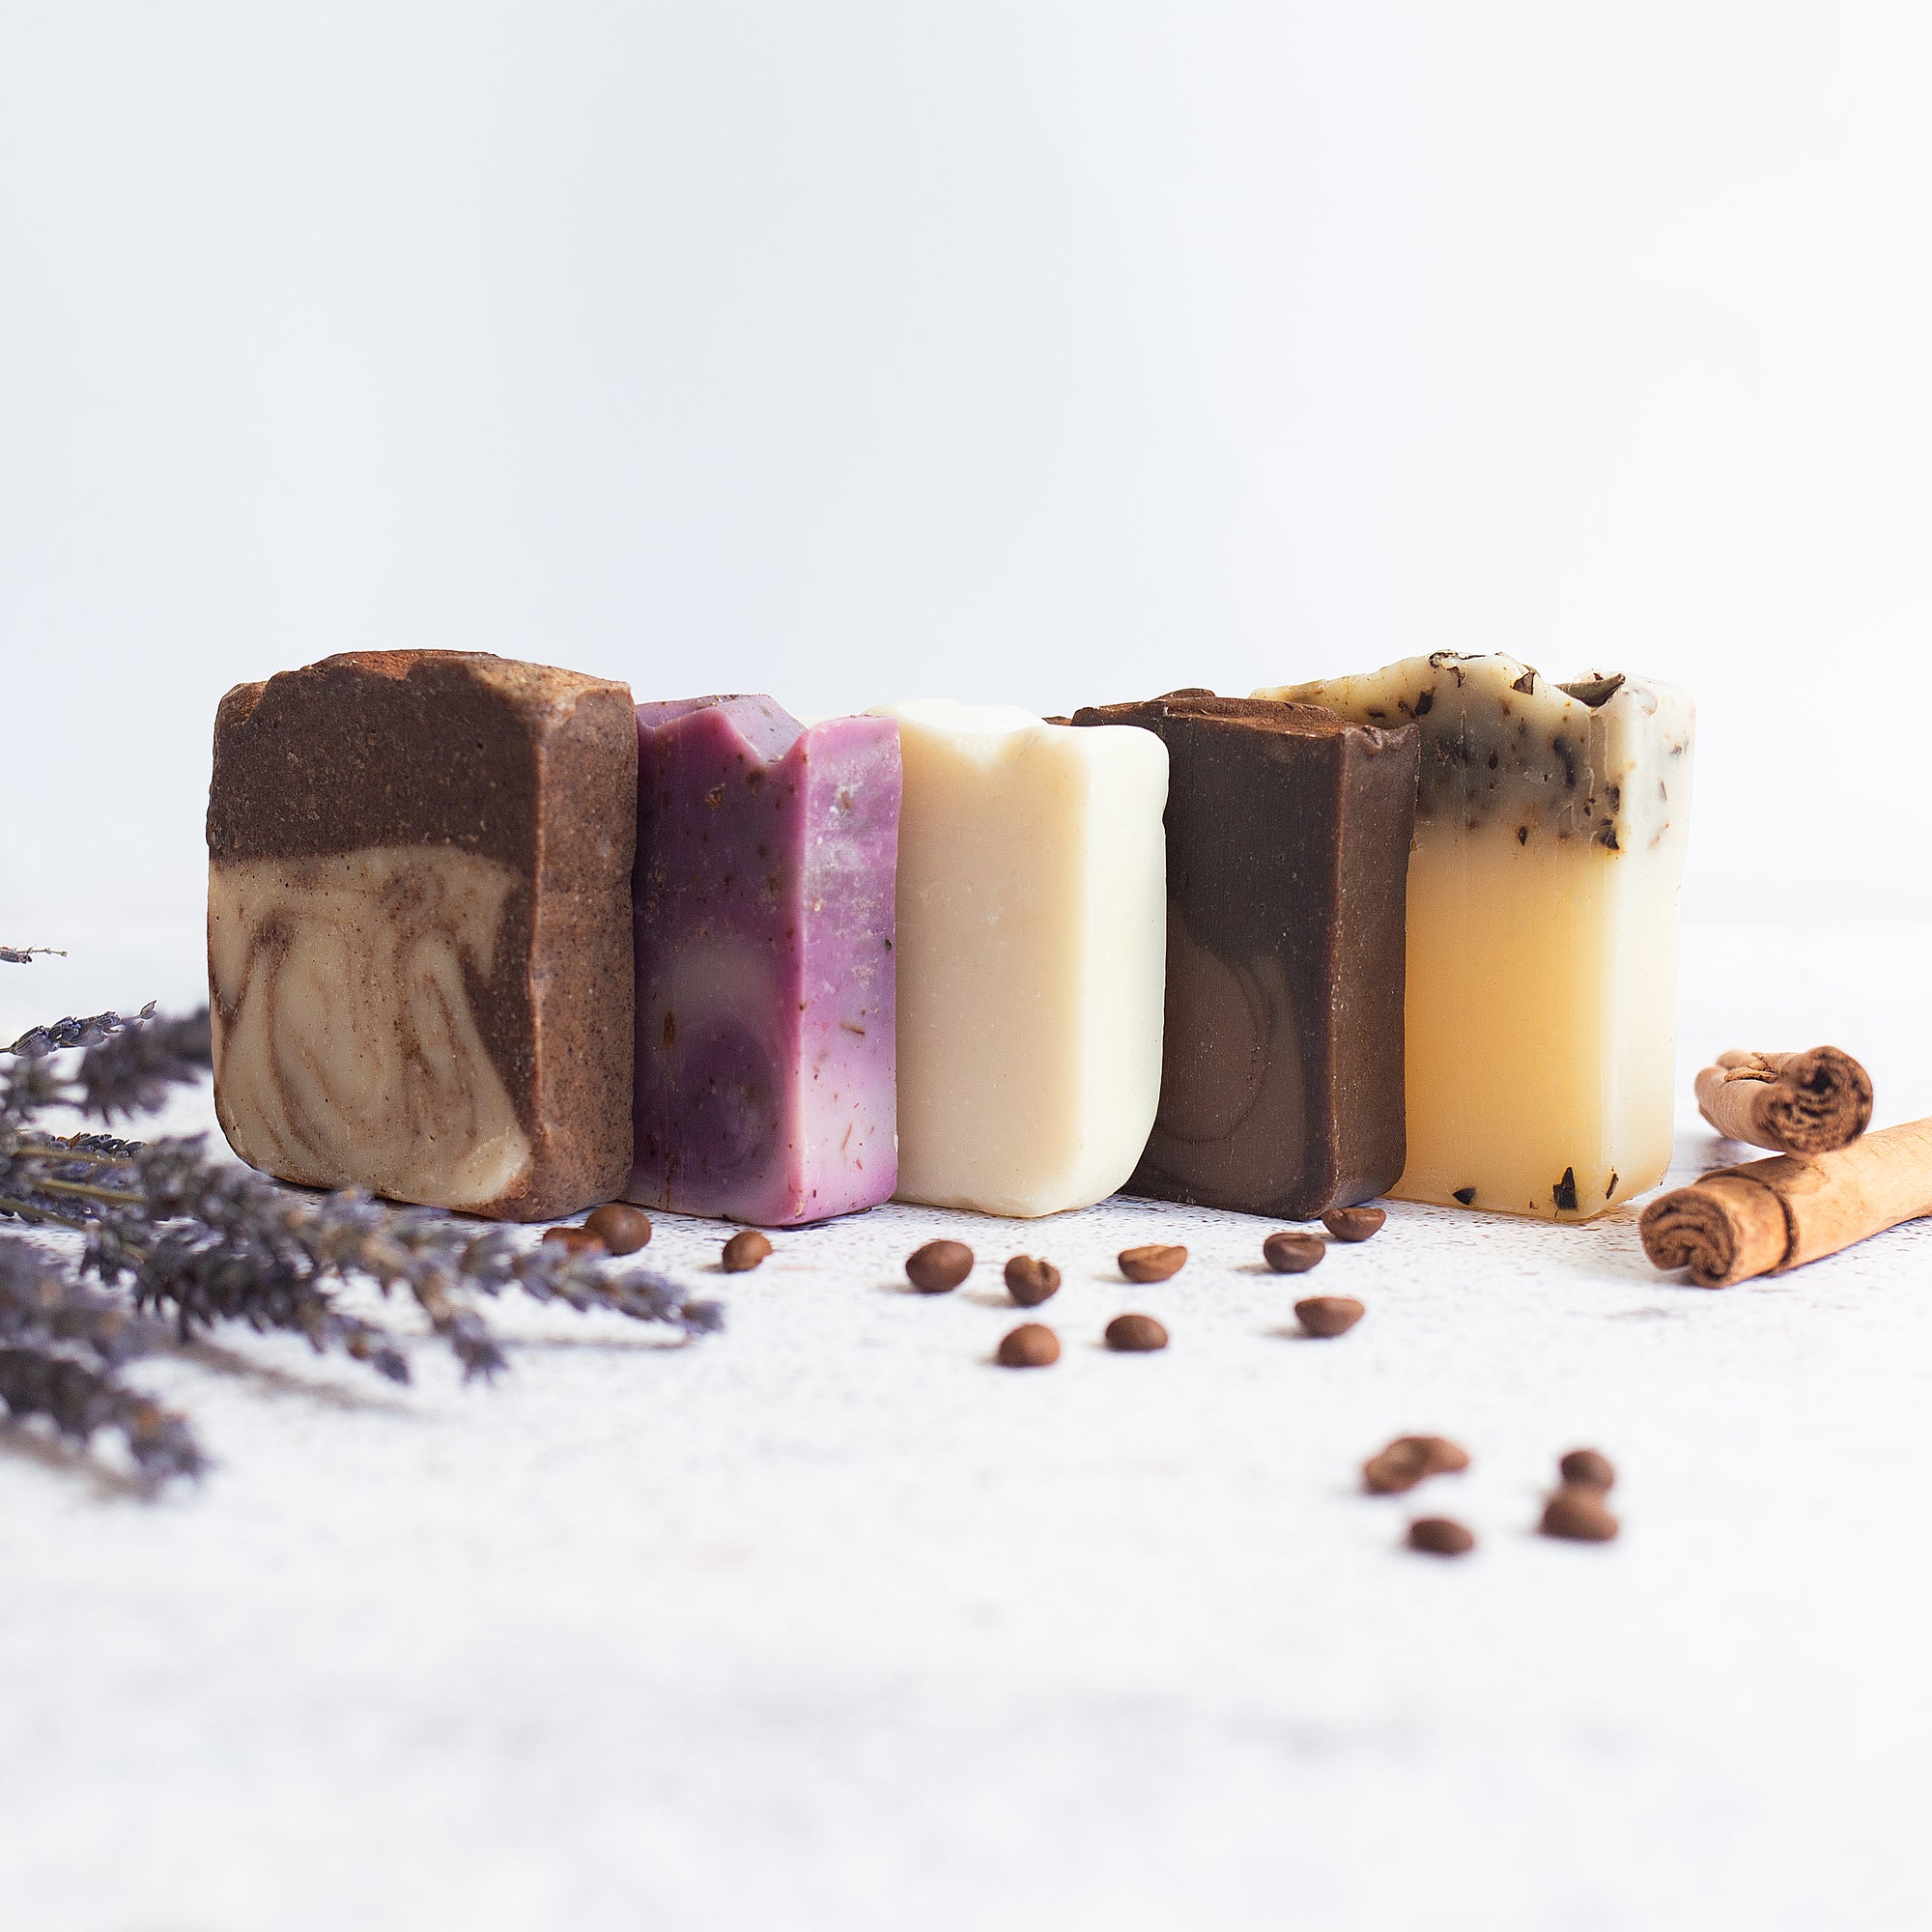 Handmade Soaps Collection.- Lifestyle image next to natural ingredients